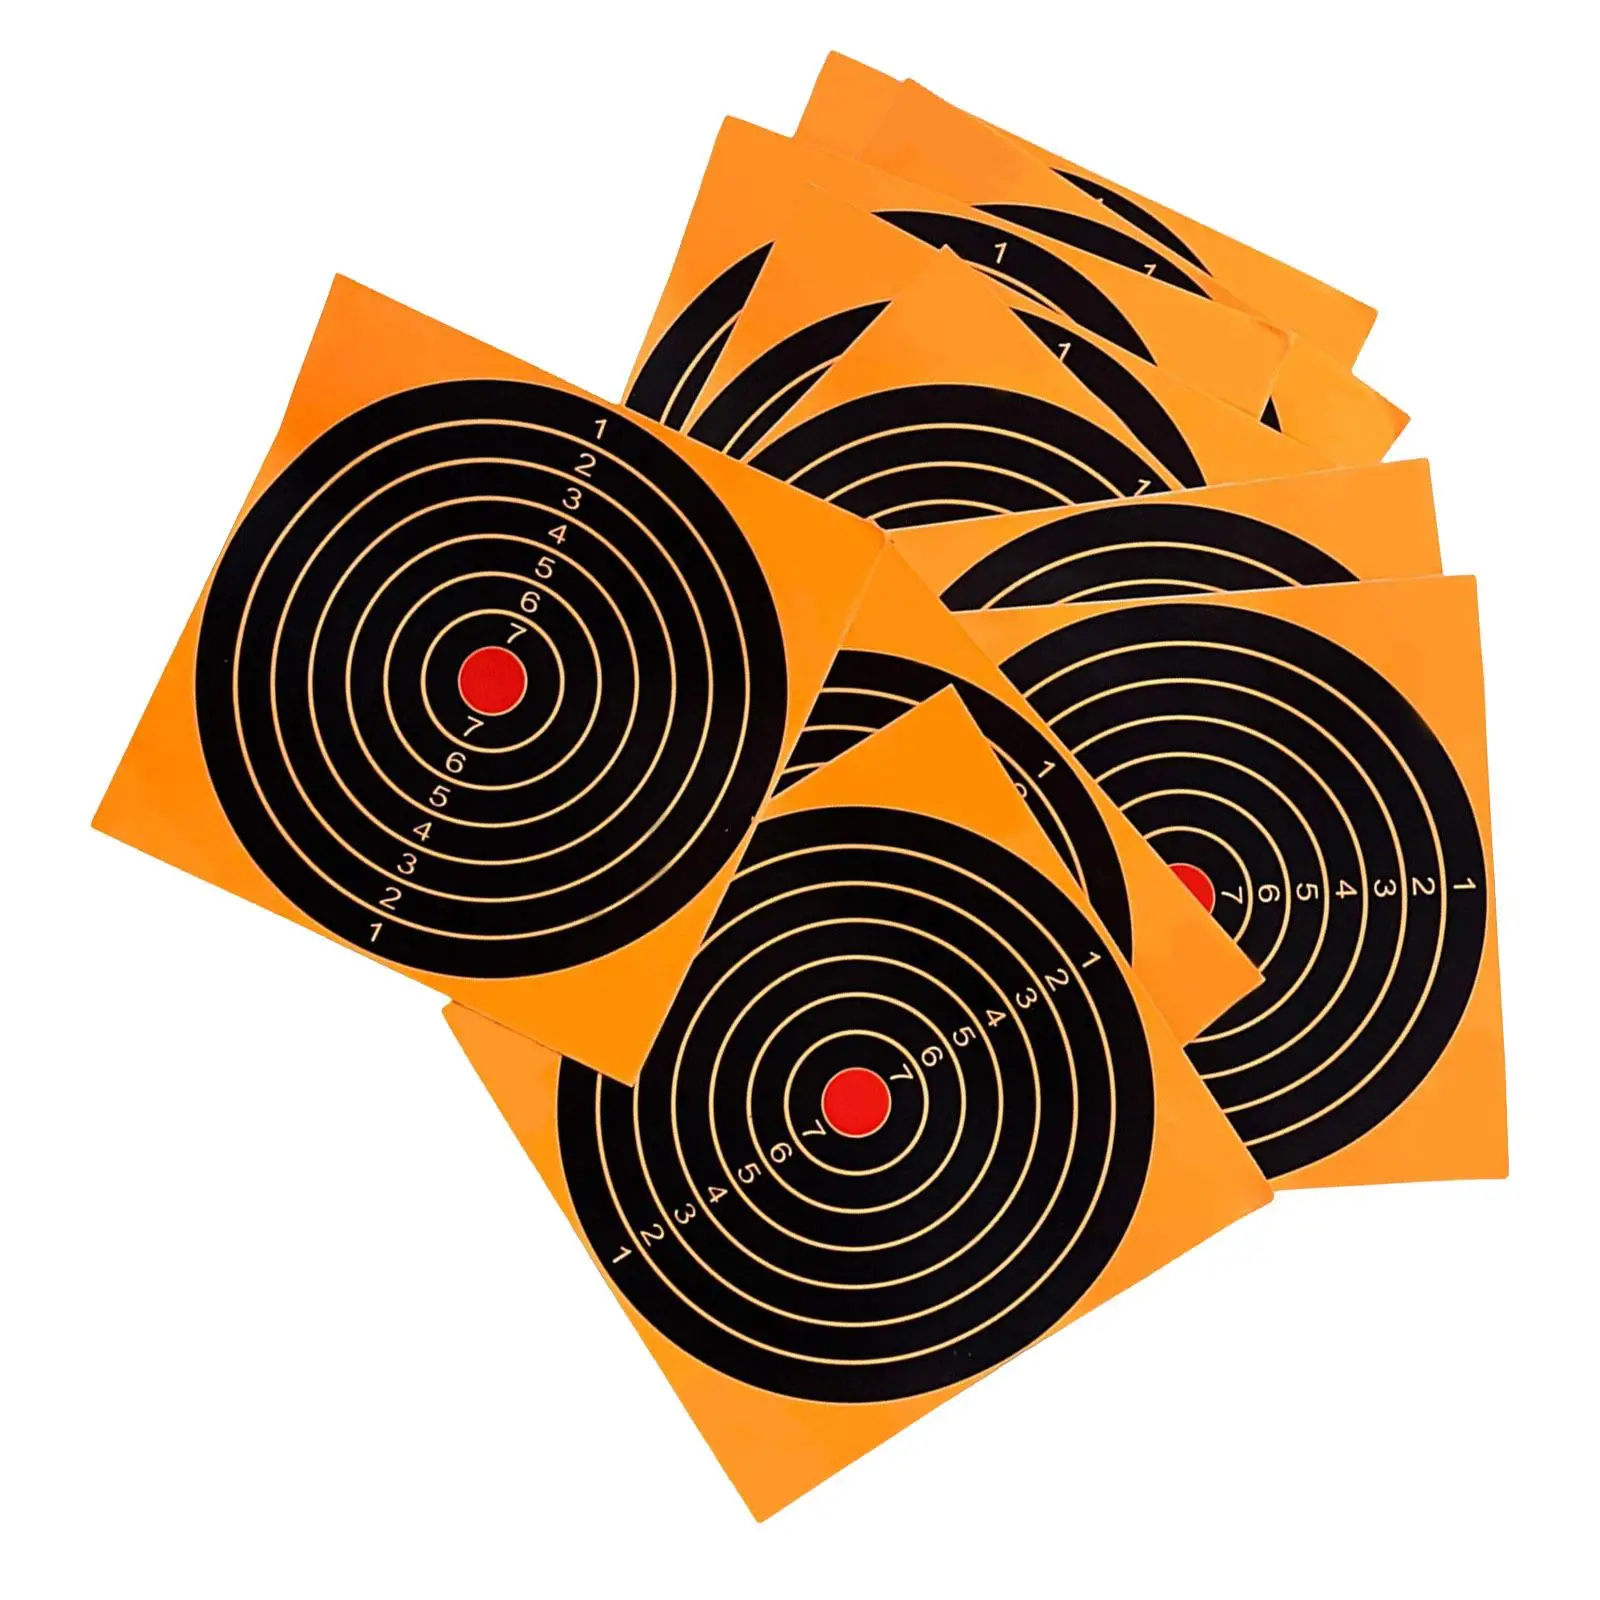 10x Self Adhesive Targets Stickers Reactive Target Shooting Exercise Training Round Targets Splatter Accessories